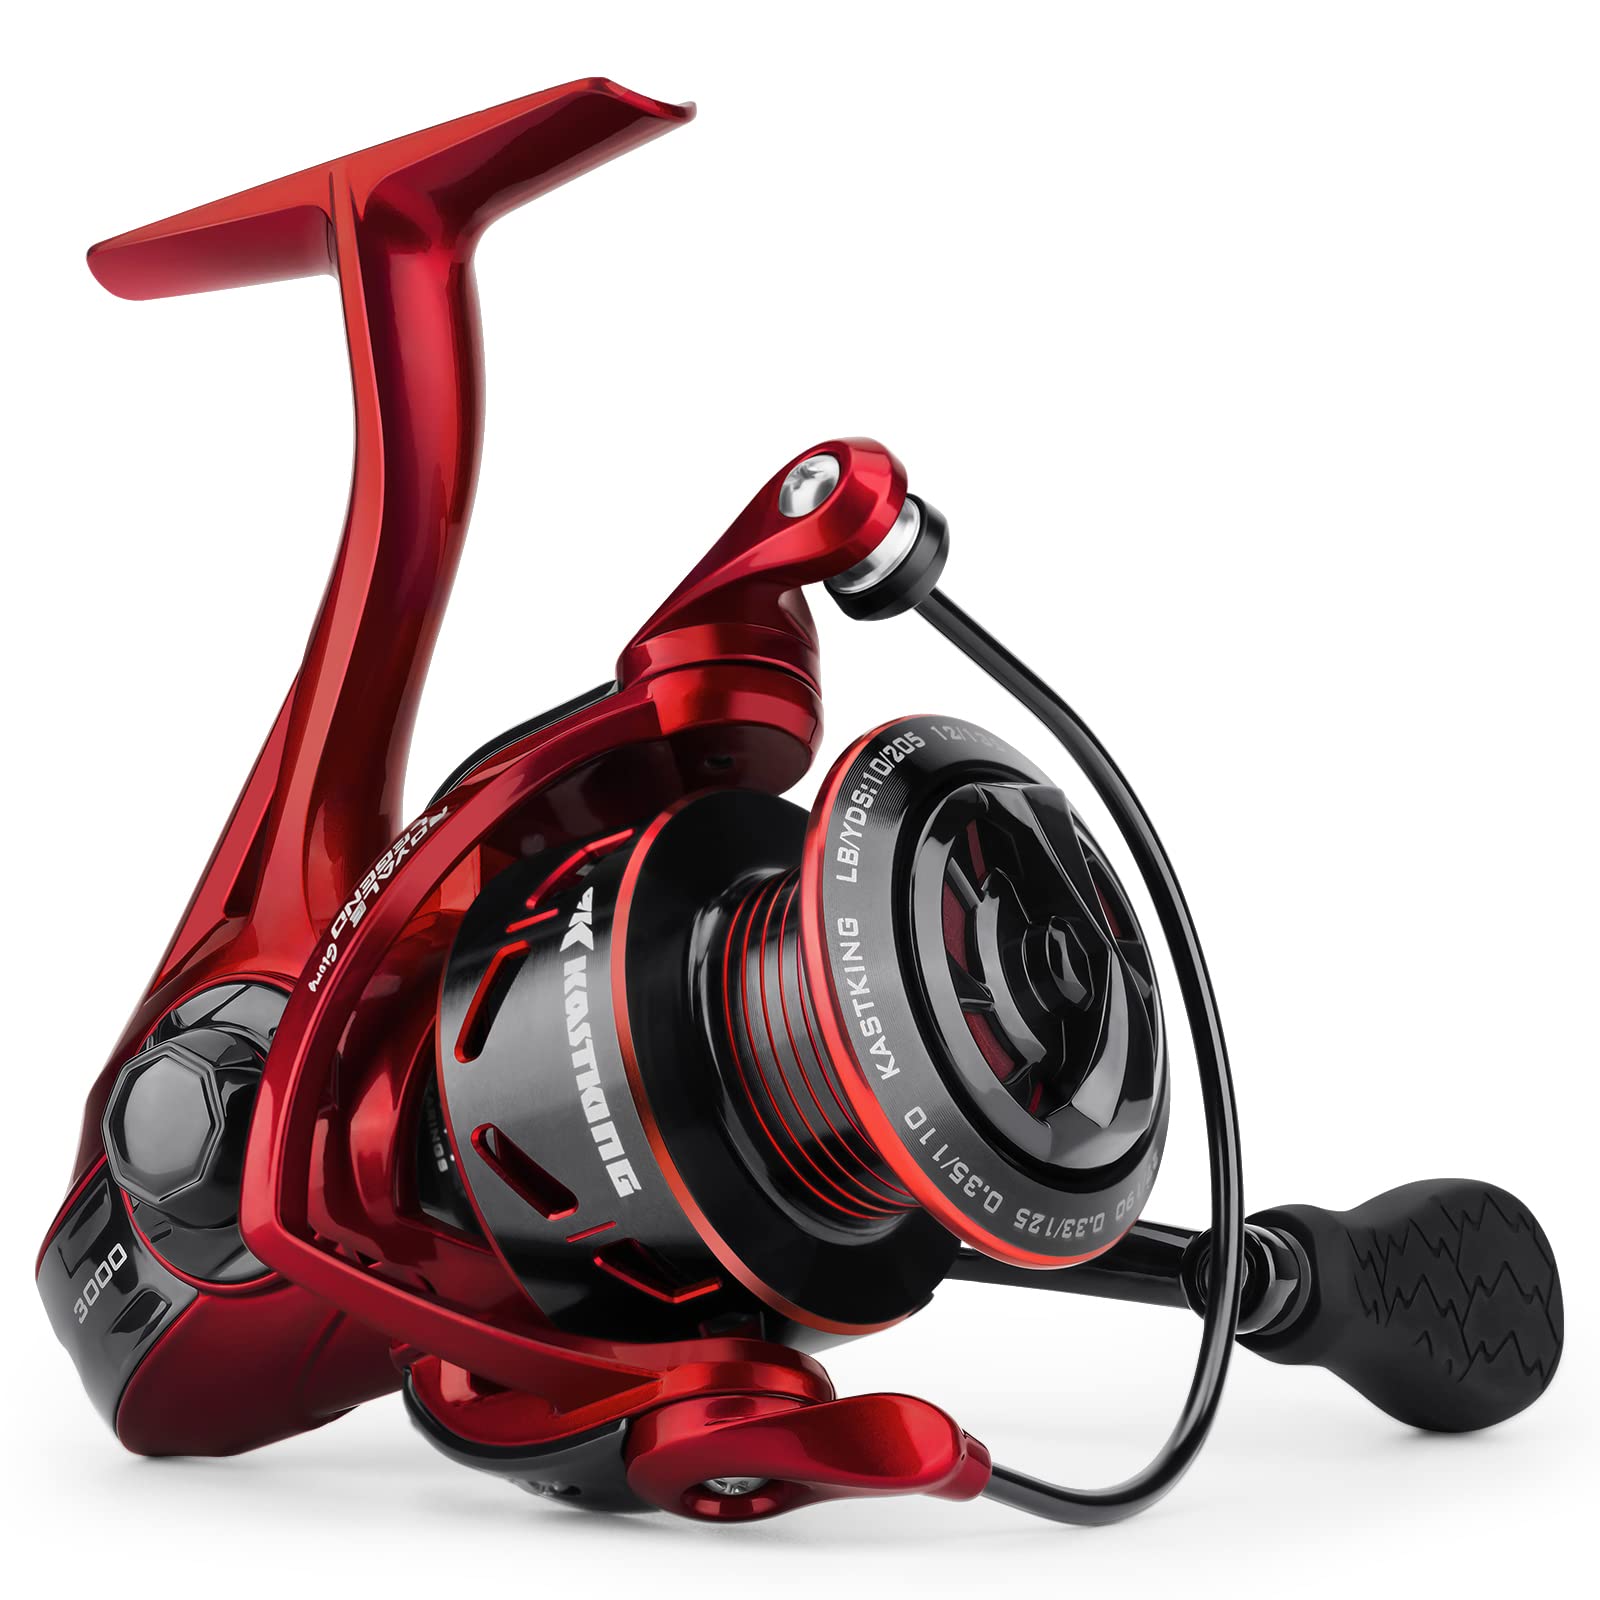 KastKing Royale Legend Glory Fishing Reel - 6.2:1 Gear Ratio Spinning Reel,  Up to 22 Lbs of Carbon Drag, 7+1 Stainless Steel Ball Bearings, Graphite  Frame, Asymmetric Spinning Reel Rotor Design Size 3000 - 6.2:1